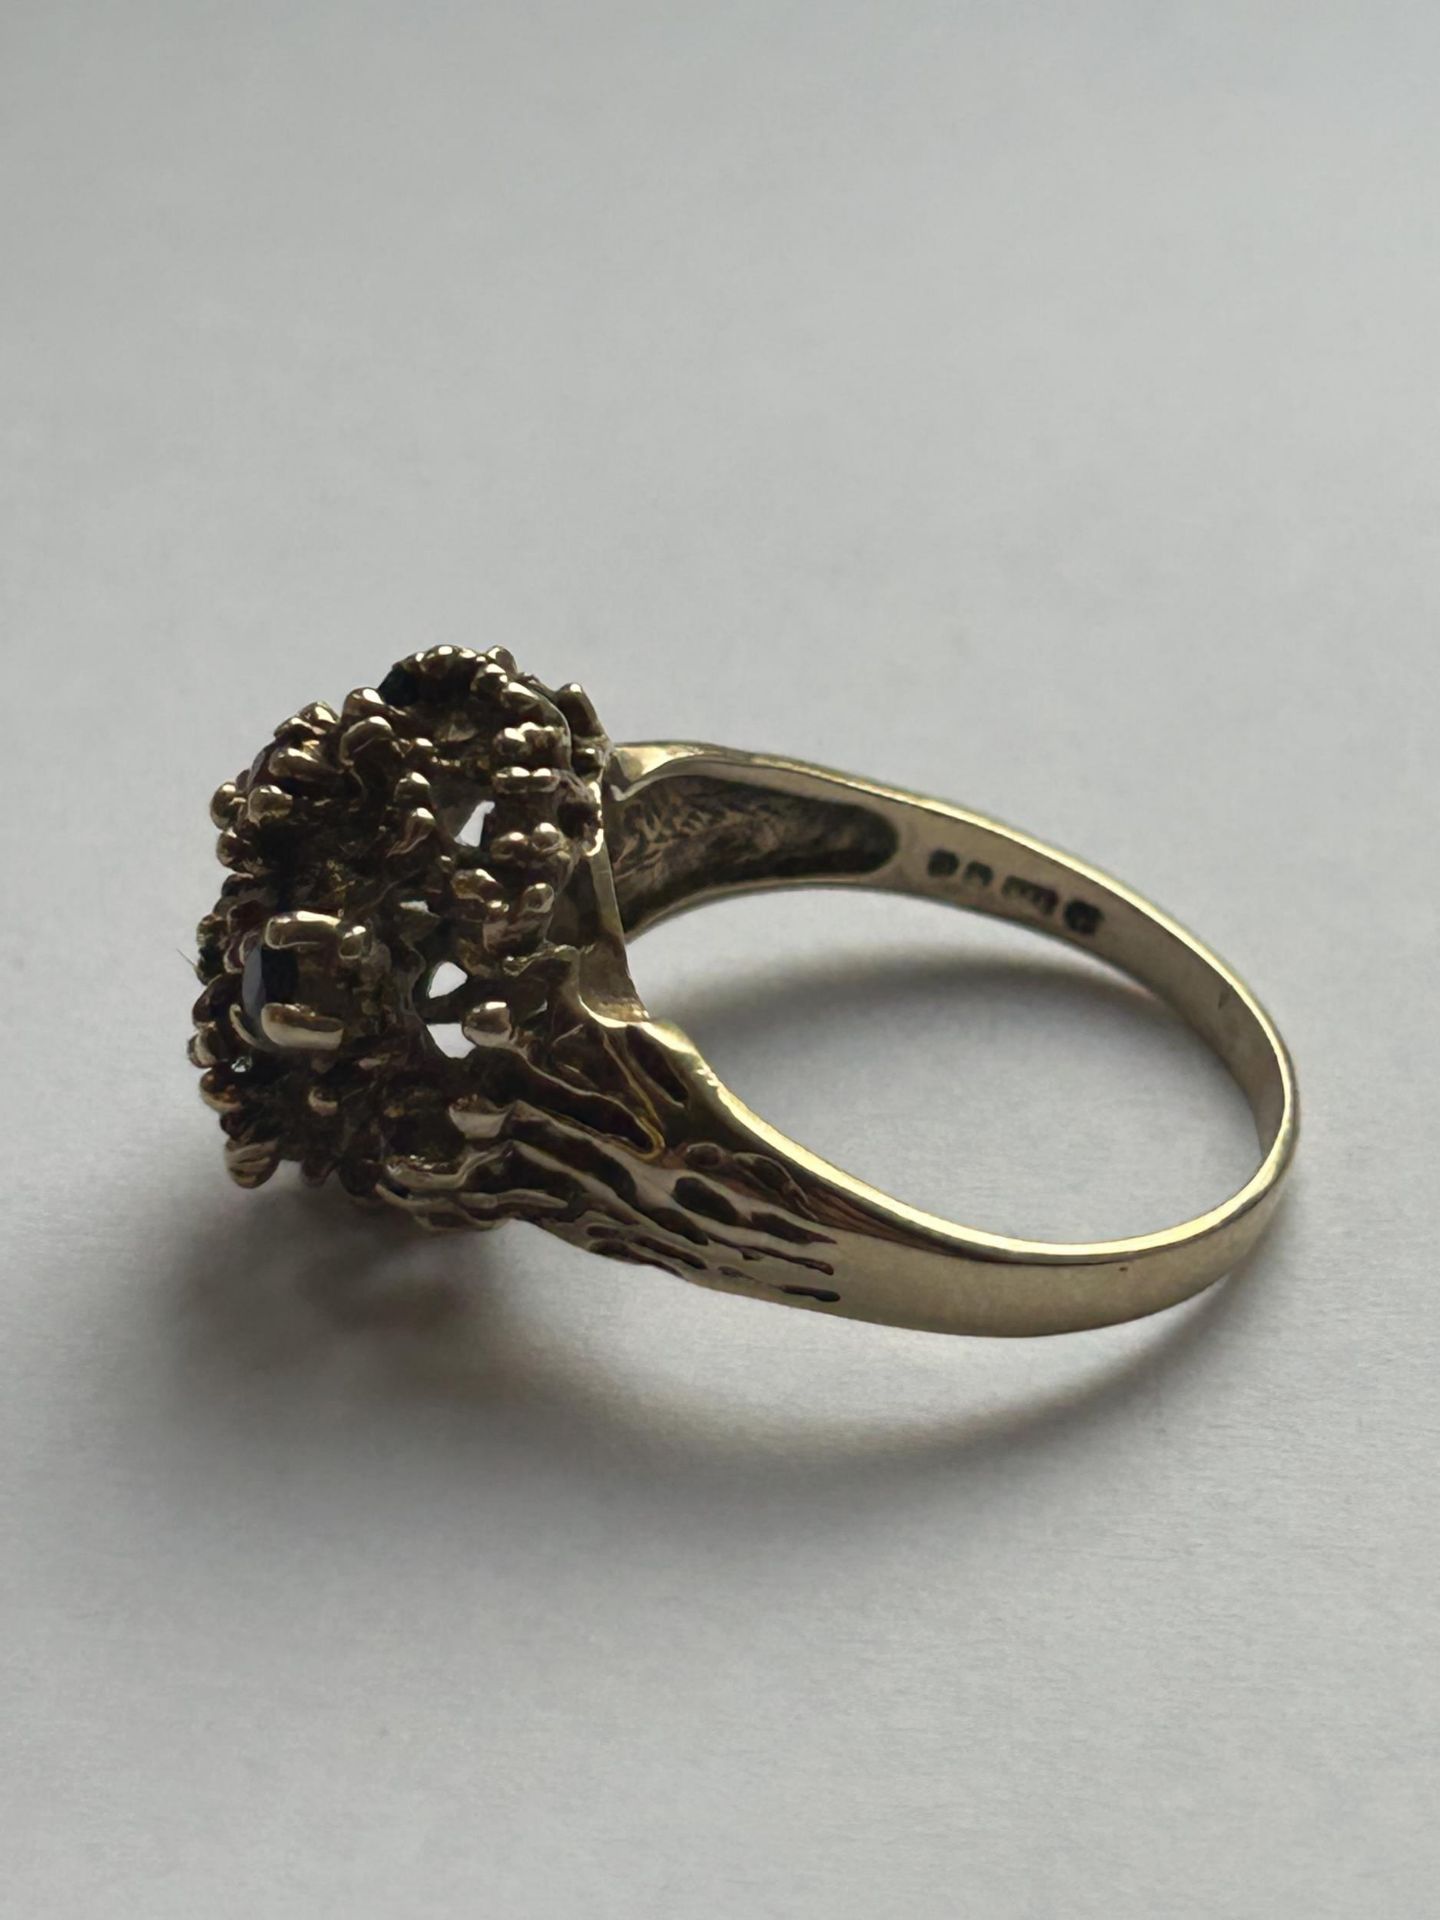 A VINTAGE 9CT YELLOW GOLD AND MULTI-STONE CLUSTER RING SIZE R, WEIGHT 4.83 GRAMS - Image 3 of 4